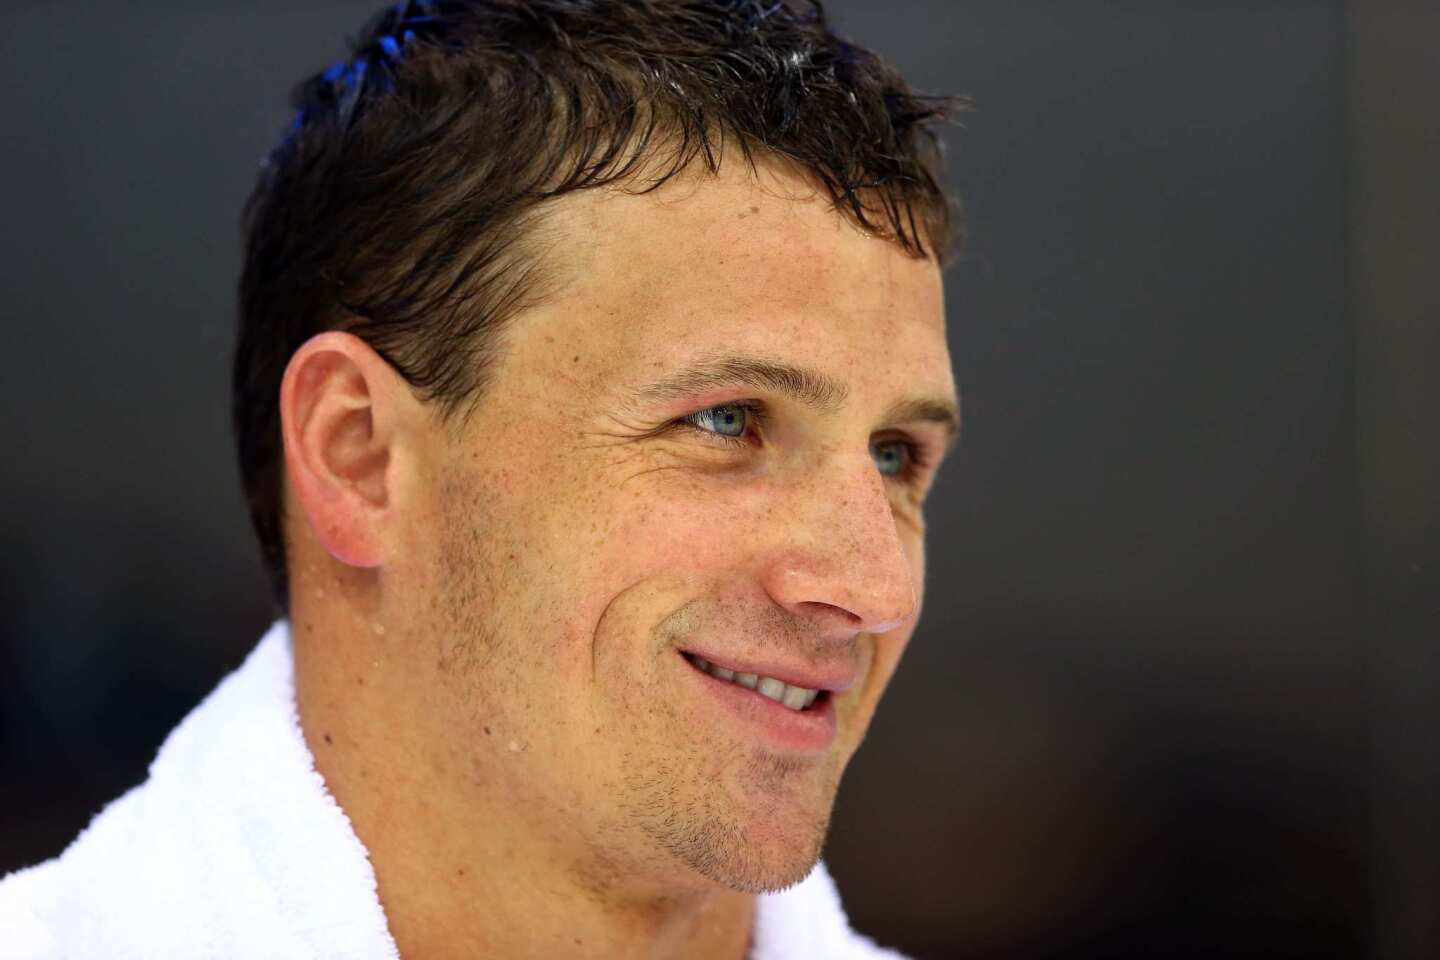 Michael Phelps' teammate, U.S. swimmer Ryan Lochte, is a strong competitor for gold in the 400-meter individual medley and could also take medals in the 200-meter individual medley, 200-meter backstroke, 200-meter freestyle and three relays.